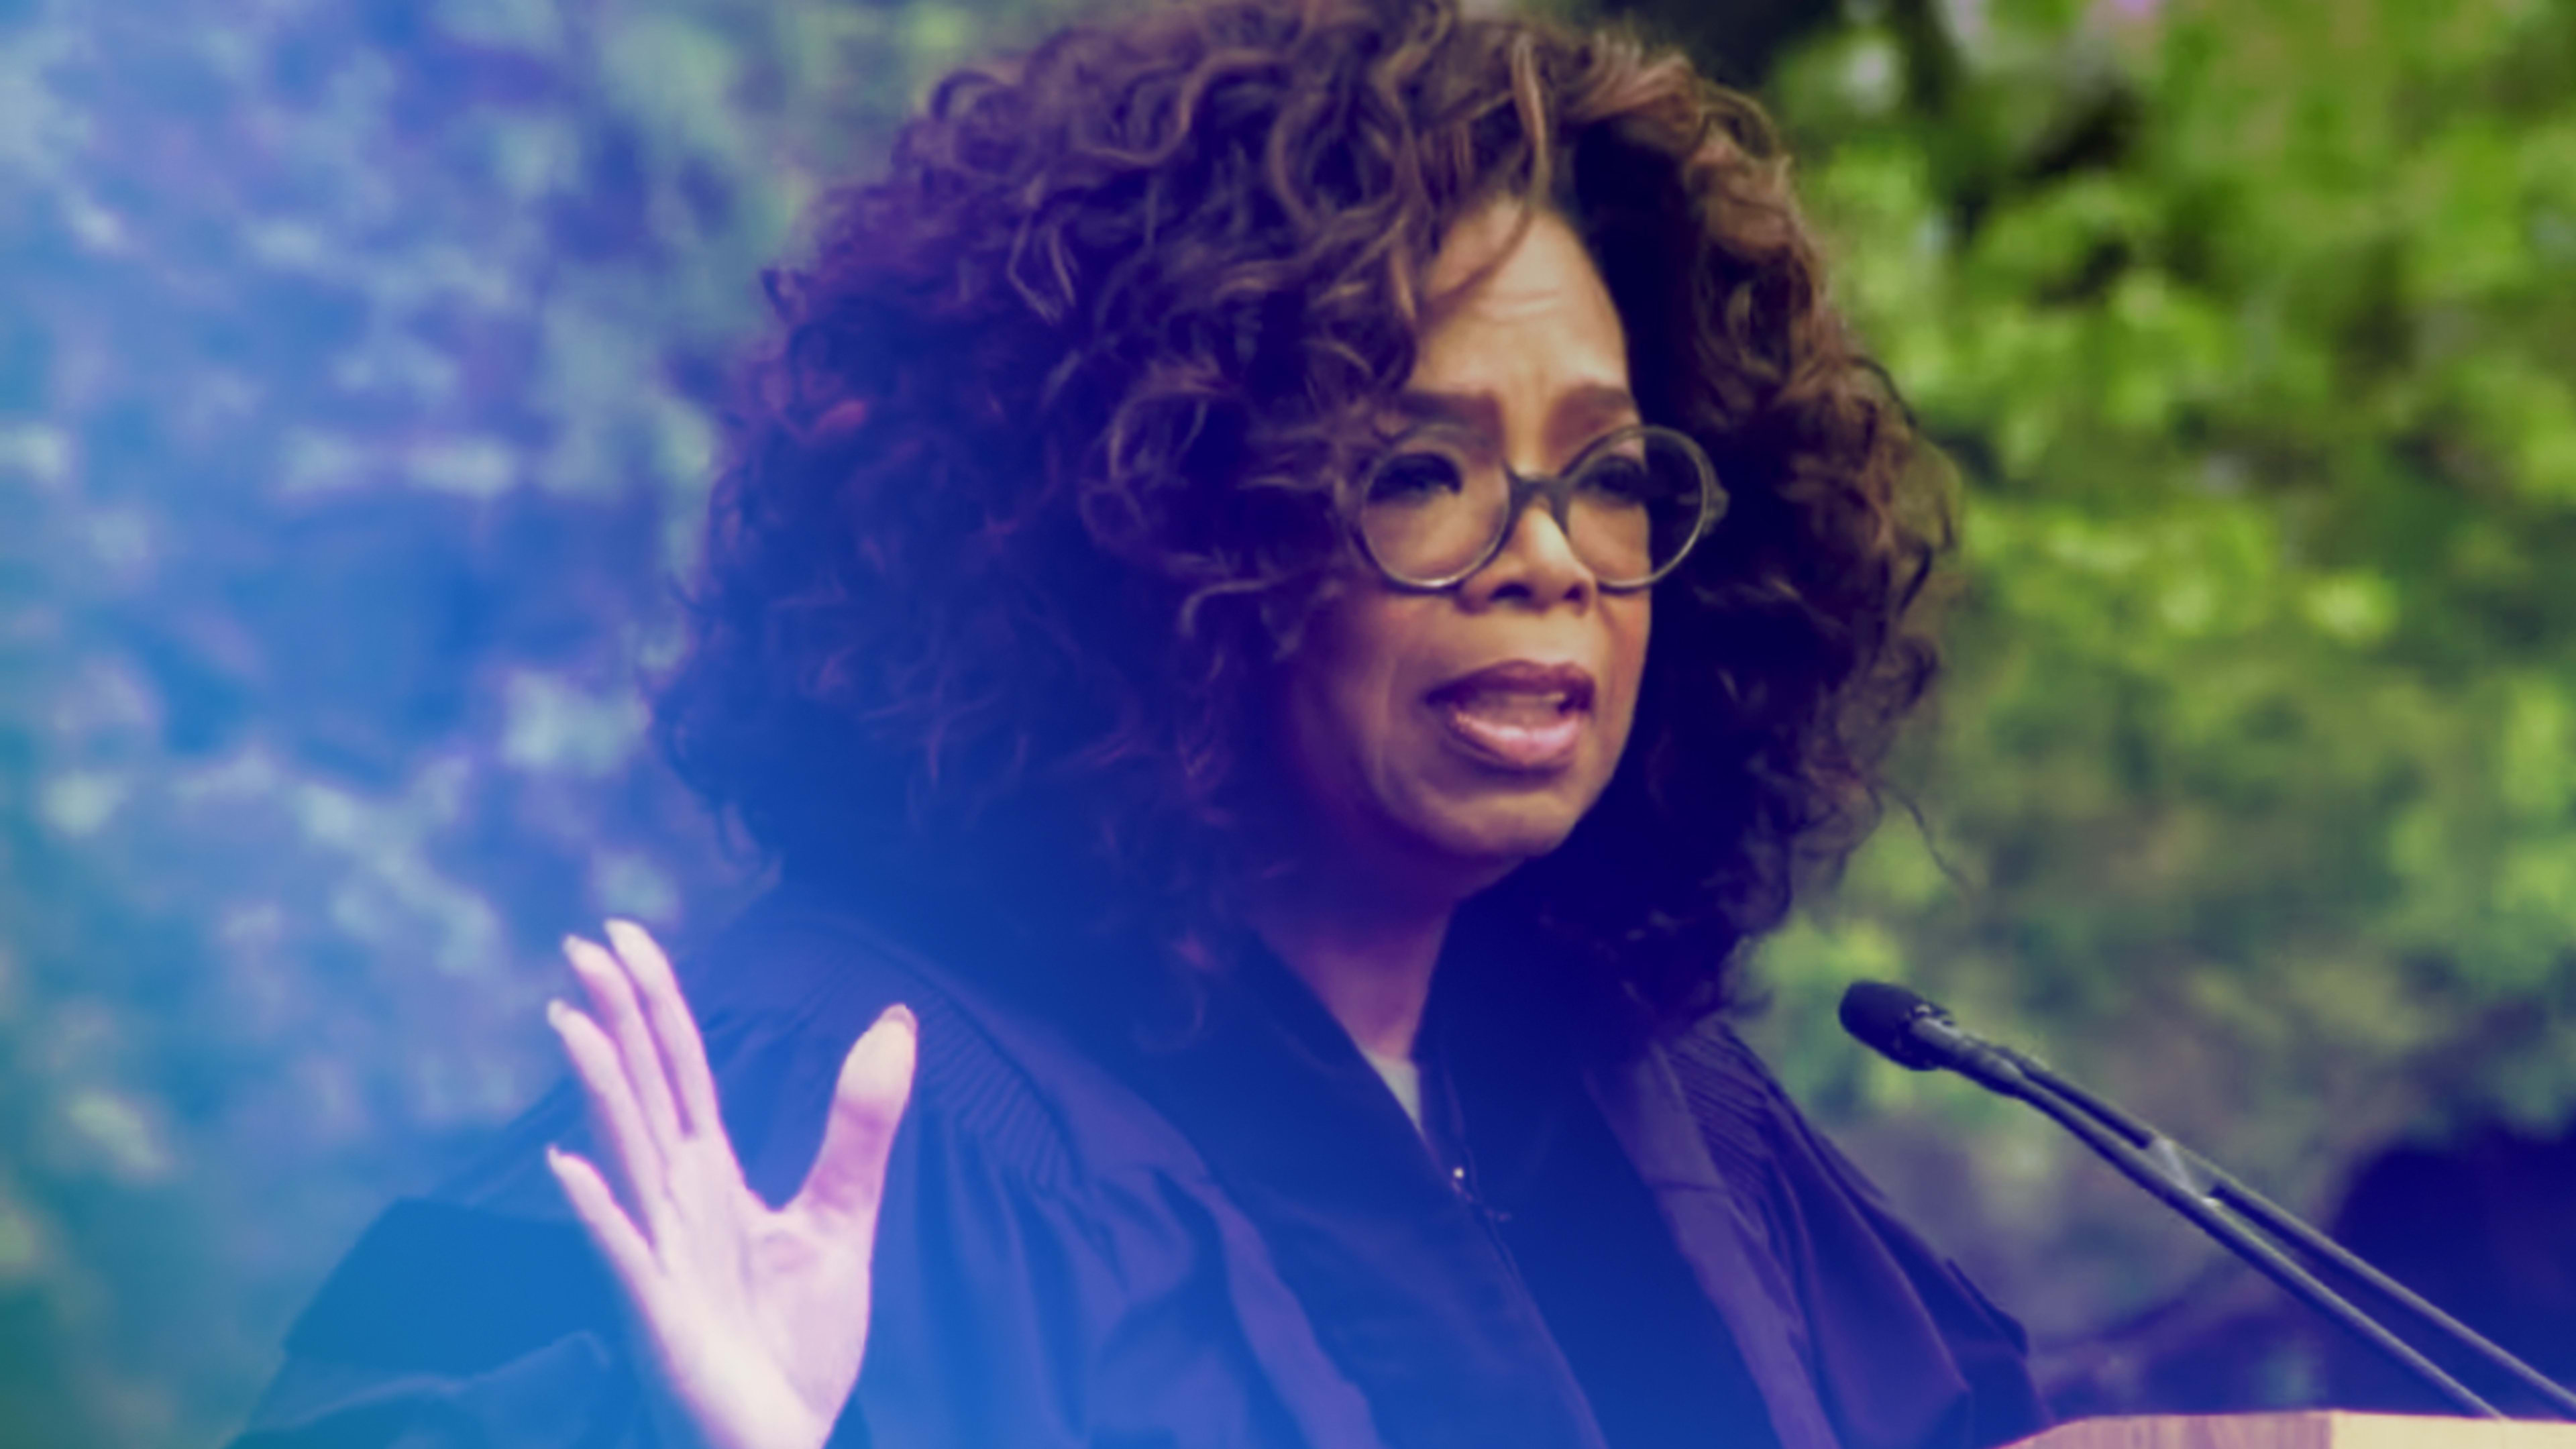 Here are Oprah’s best words of wisdom from her Colorado College commencement speech